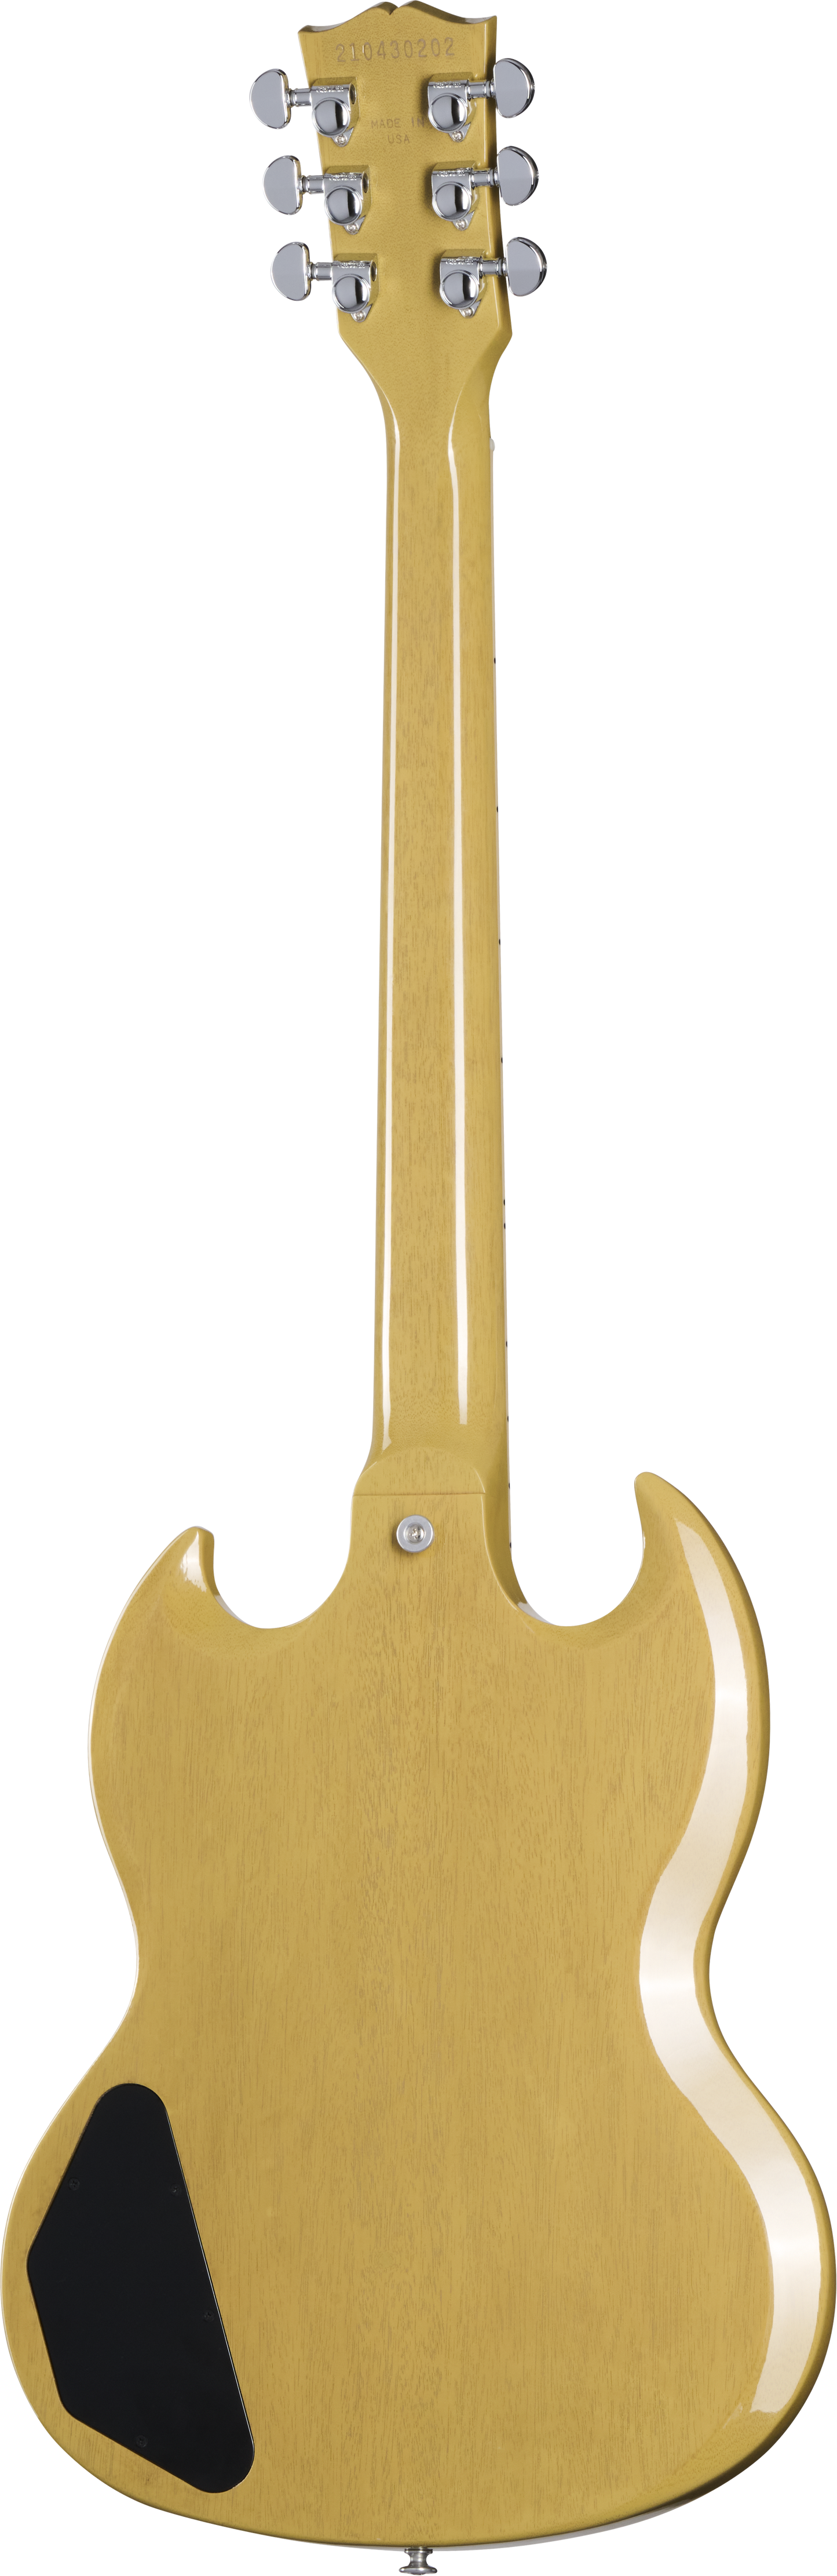 Back of Gibson SG Standard TV Yellow.